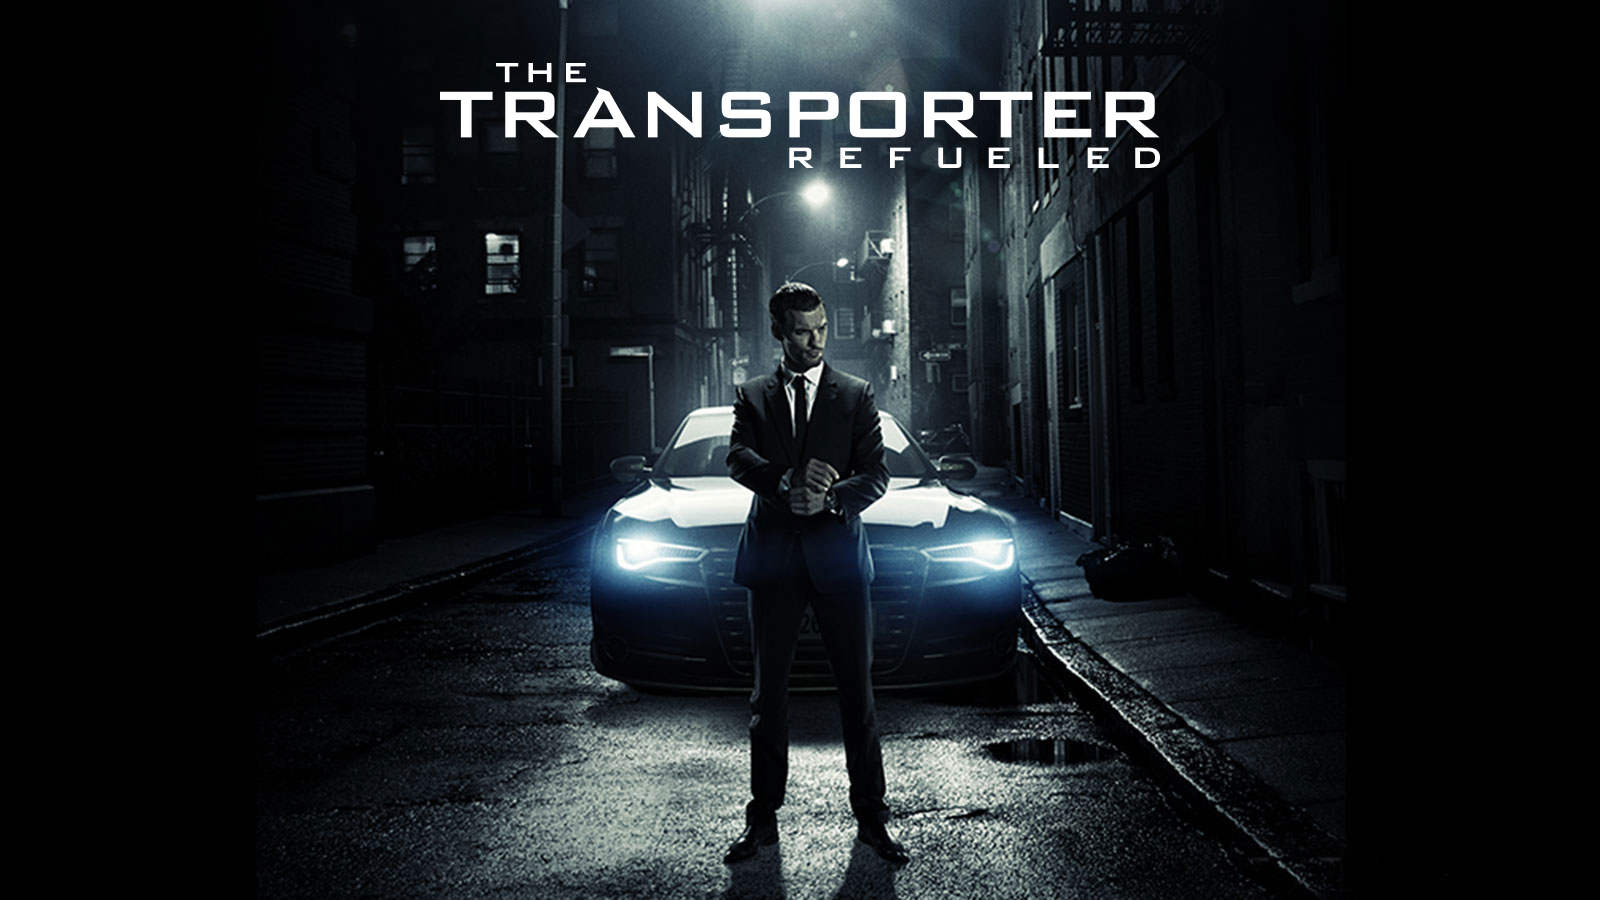 The Transporter Refueled #2